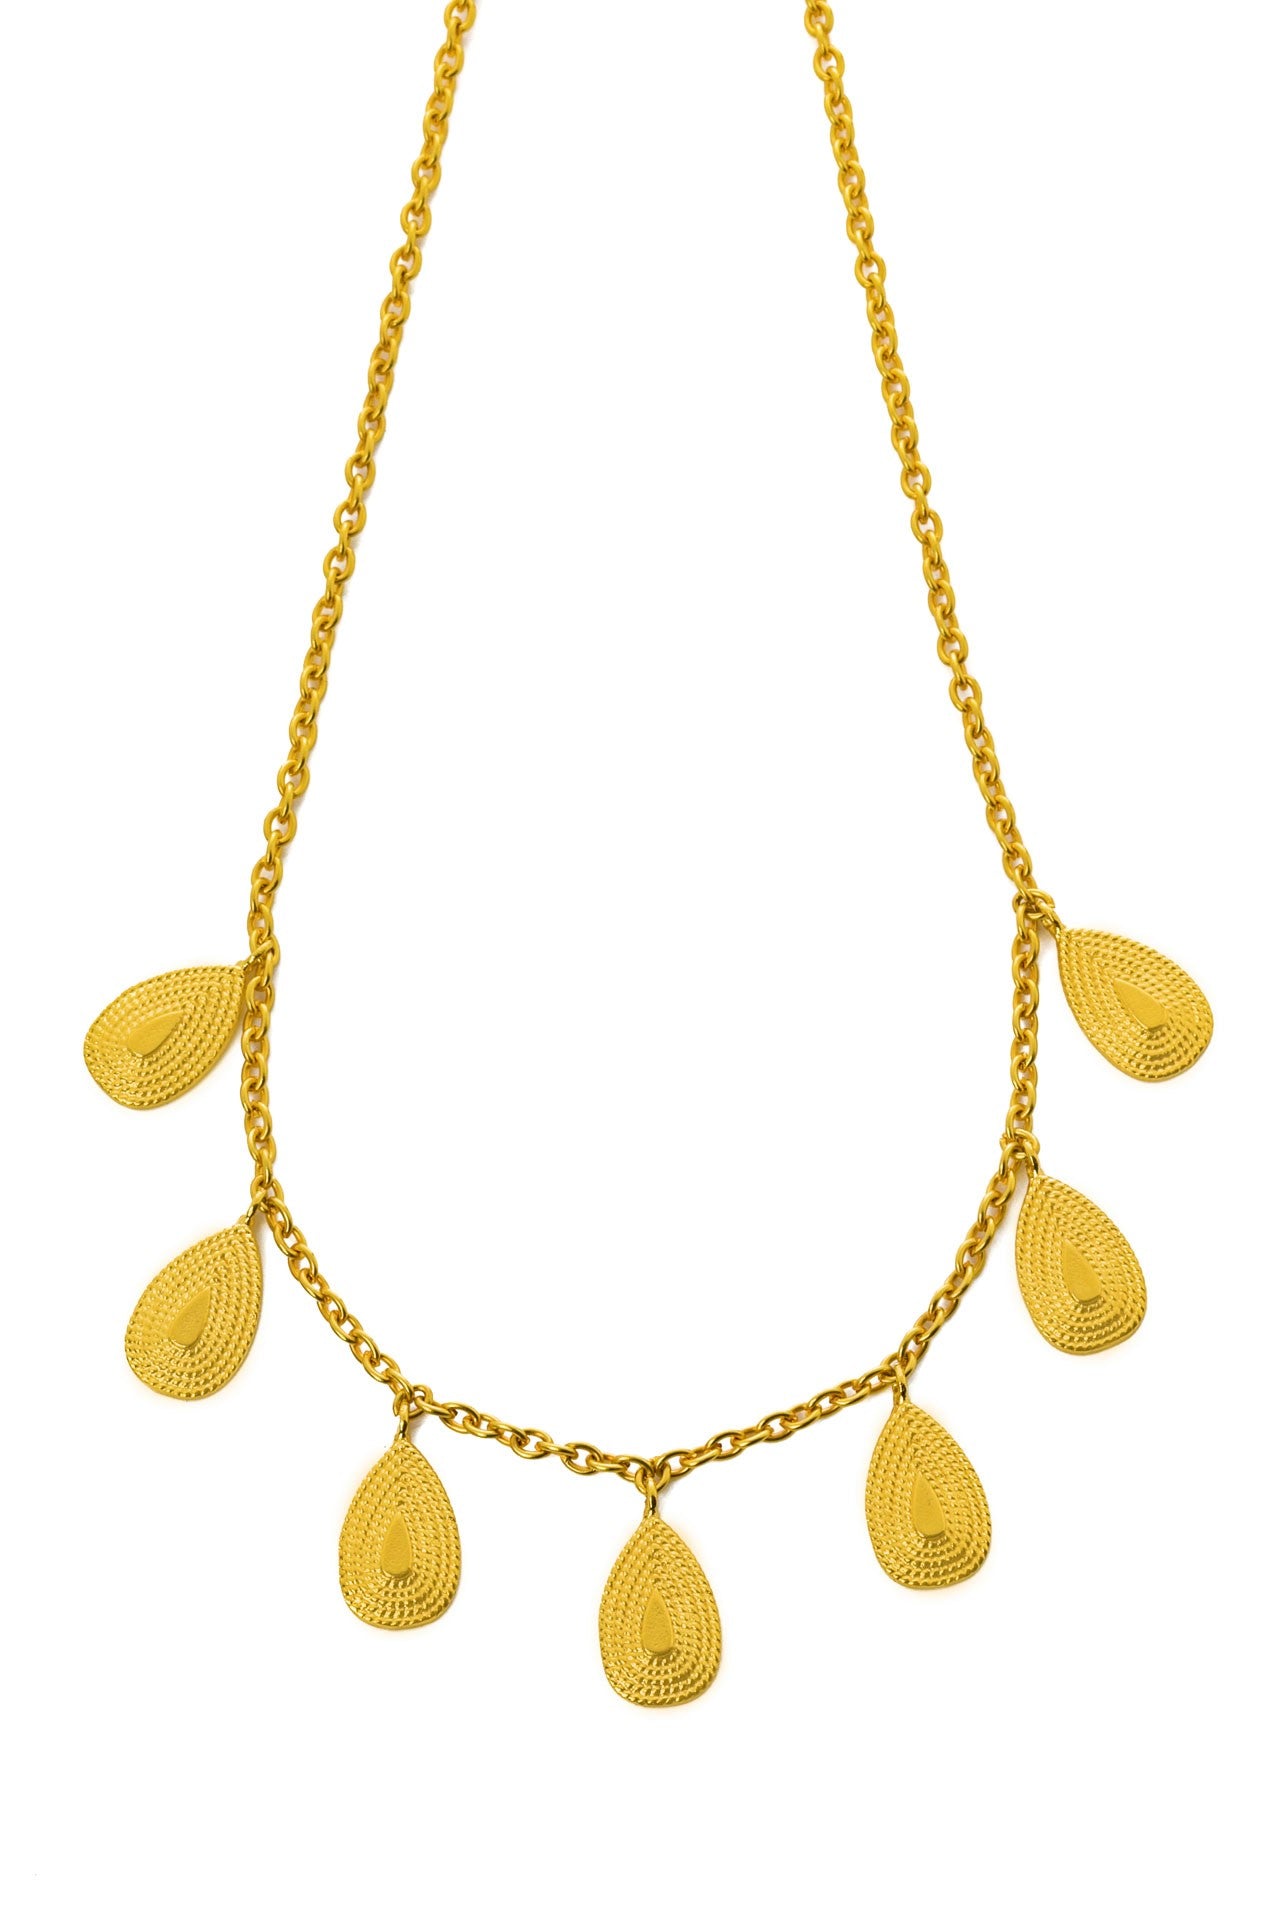 Bianca necklace brass  by Pearl Martini